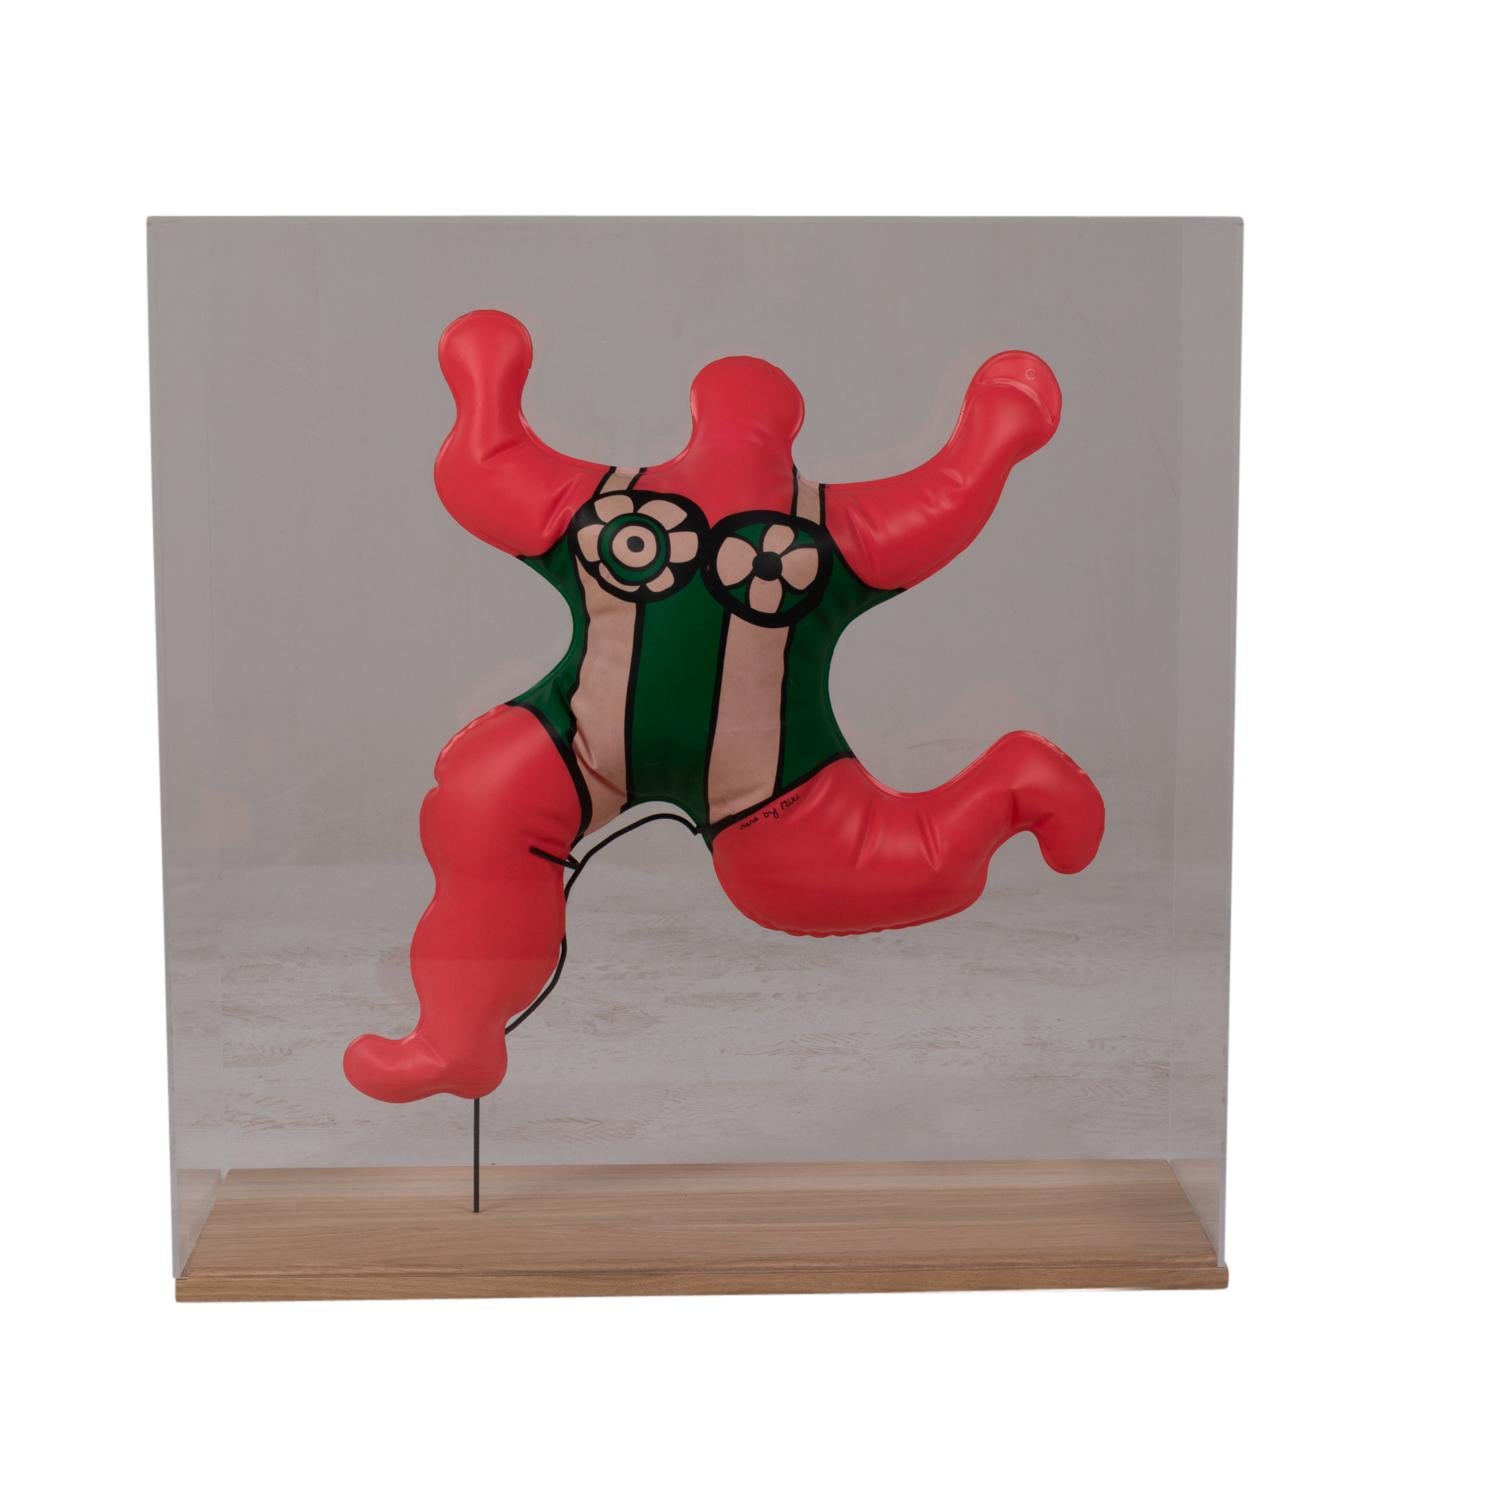 Niki de Saint Phalle for Flammarion, signed on the back.

Silkscreen printed in the form of an inflatable plastic doll, “Nana” model, displayed in its custom-made Plexiglas and blond oak base, with a tilting black lacquered metal rod.

French